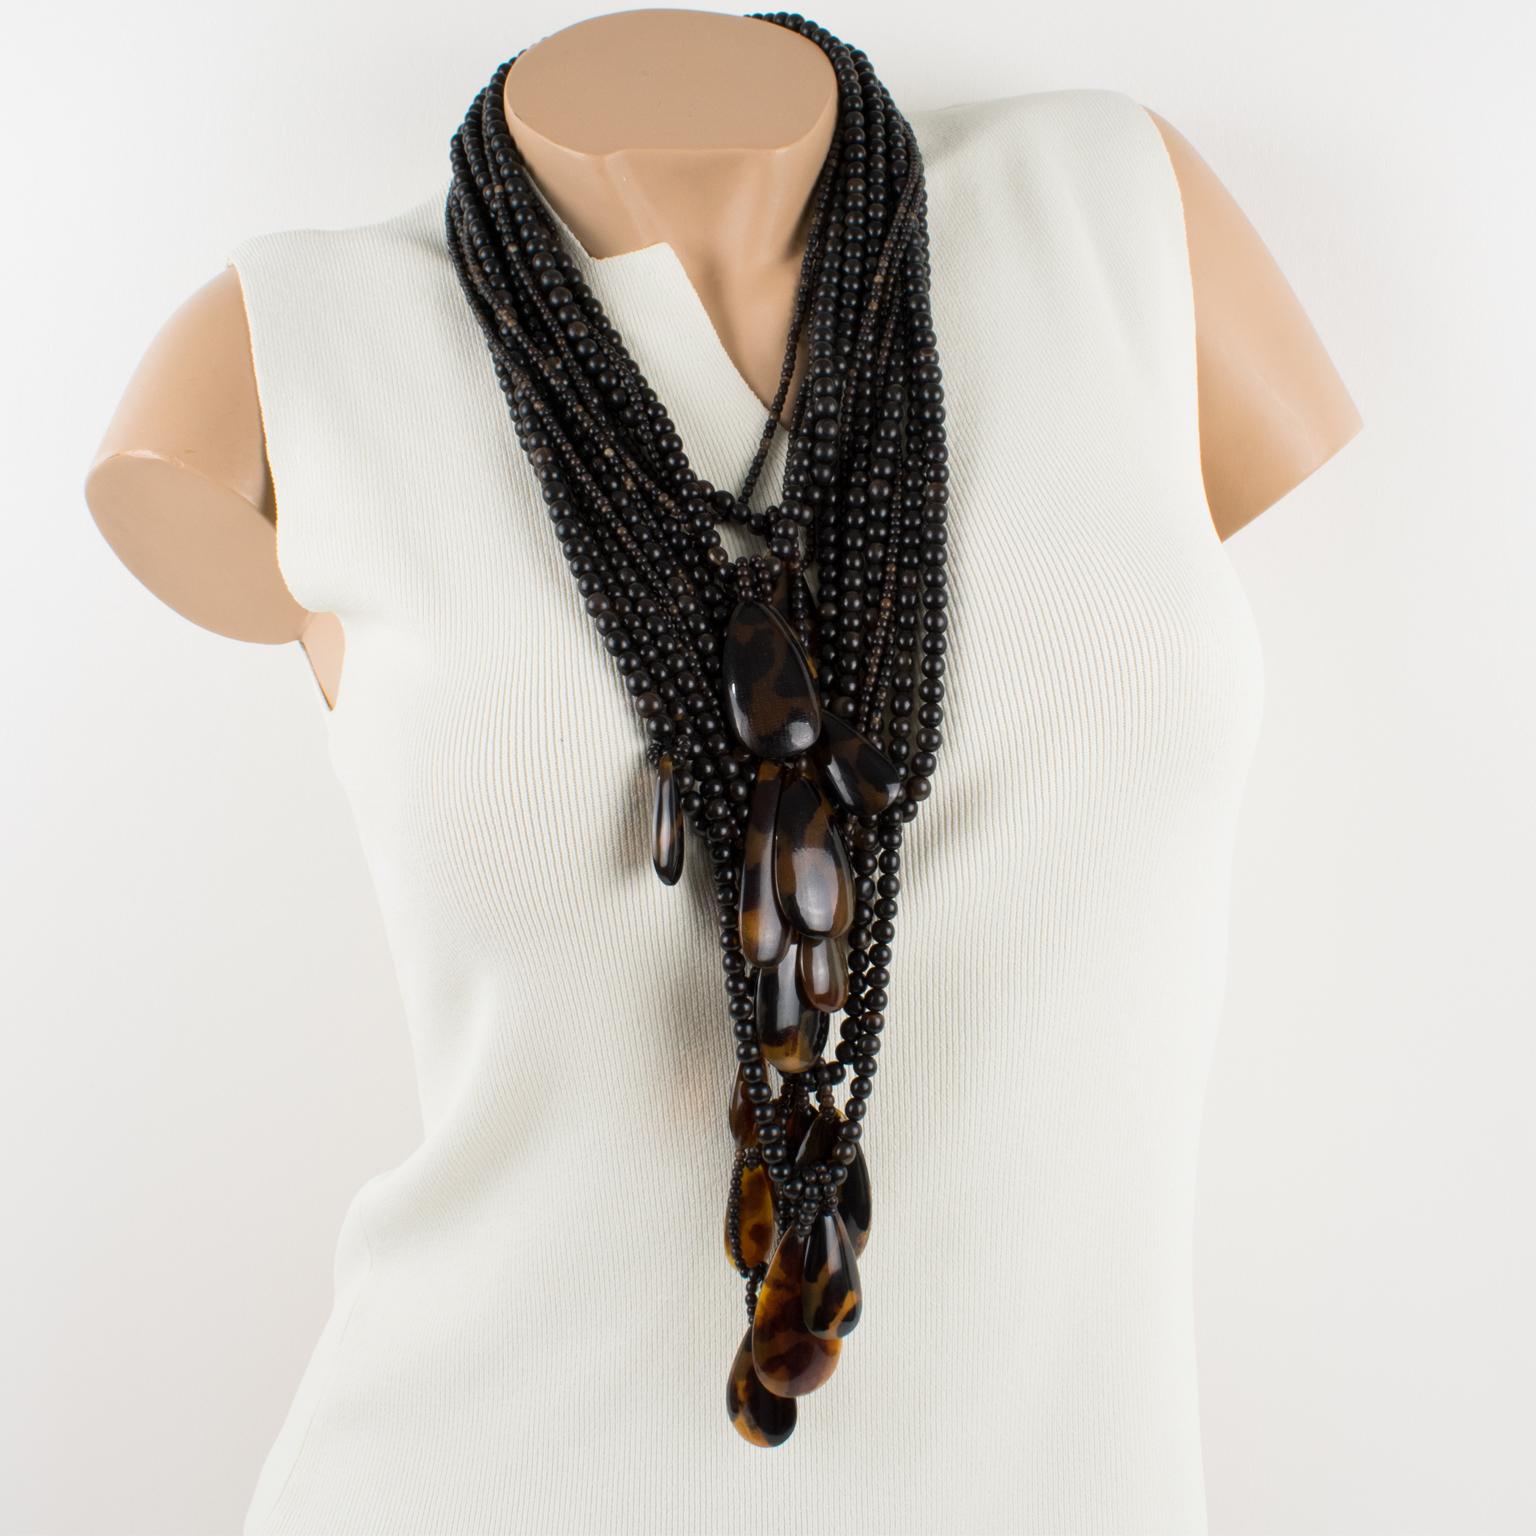 Mesmerizing oversized resin necklace by Gerda Lyngaard for Monies. Chunky hand-crafted multi-strand carved seed beads in resin carved and treated to resemble faux horn, complemented with tear-drop resin elements in faux tortoise marble color. Resin